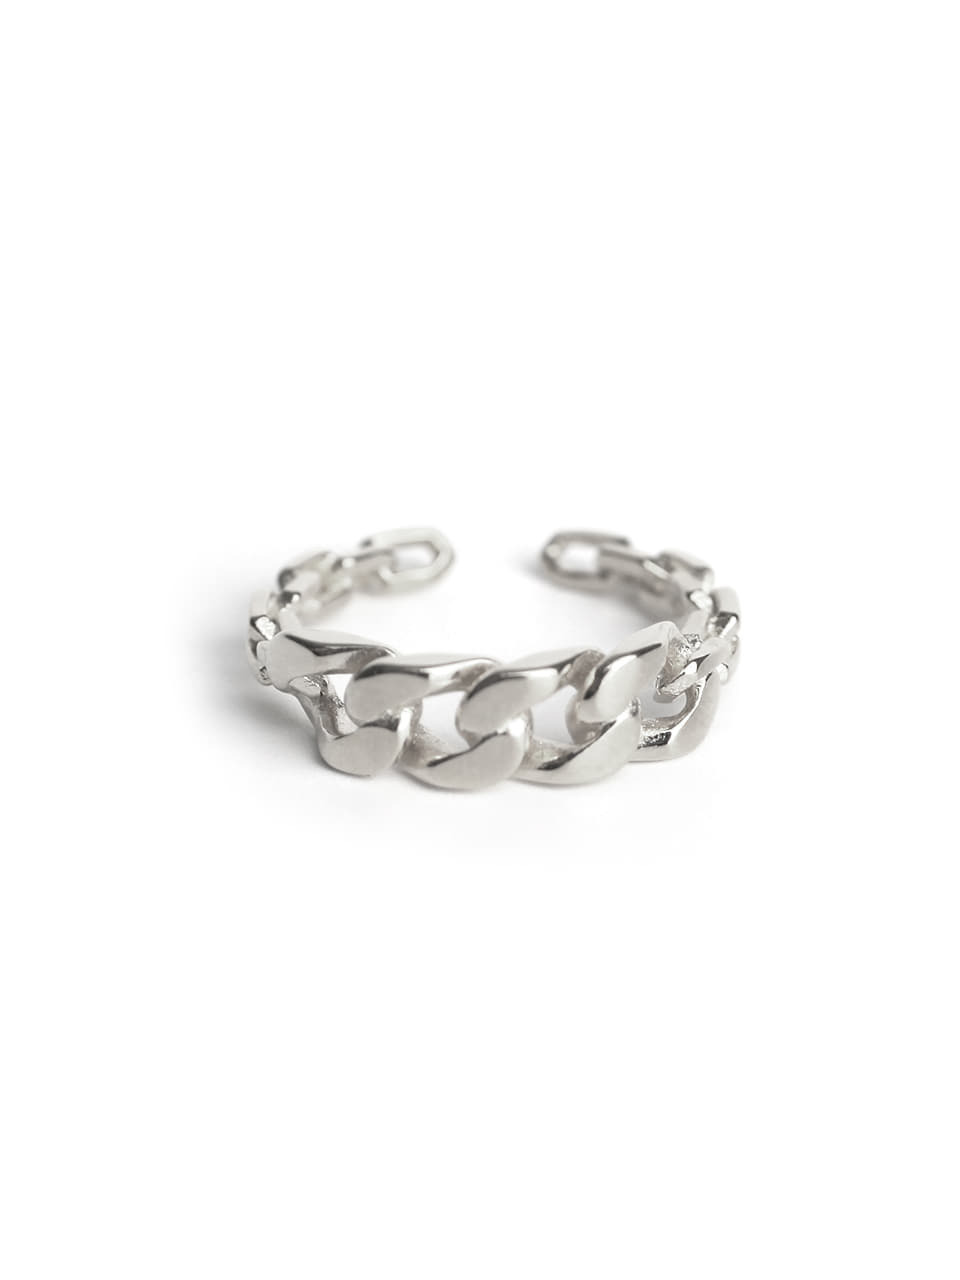 [Silver925] JB053 Two chain open ring